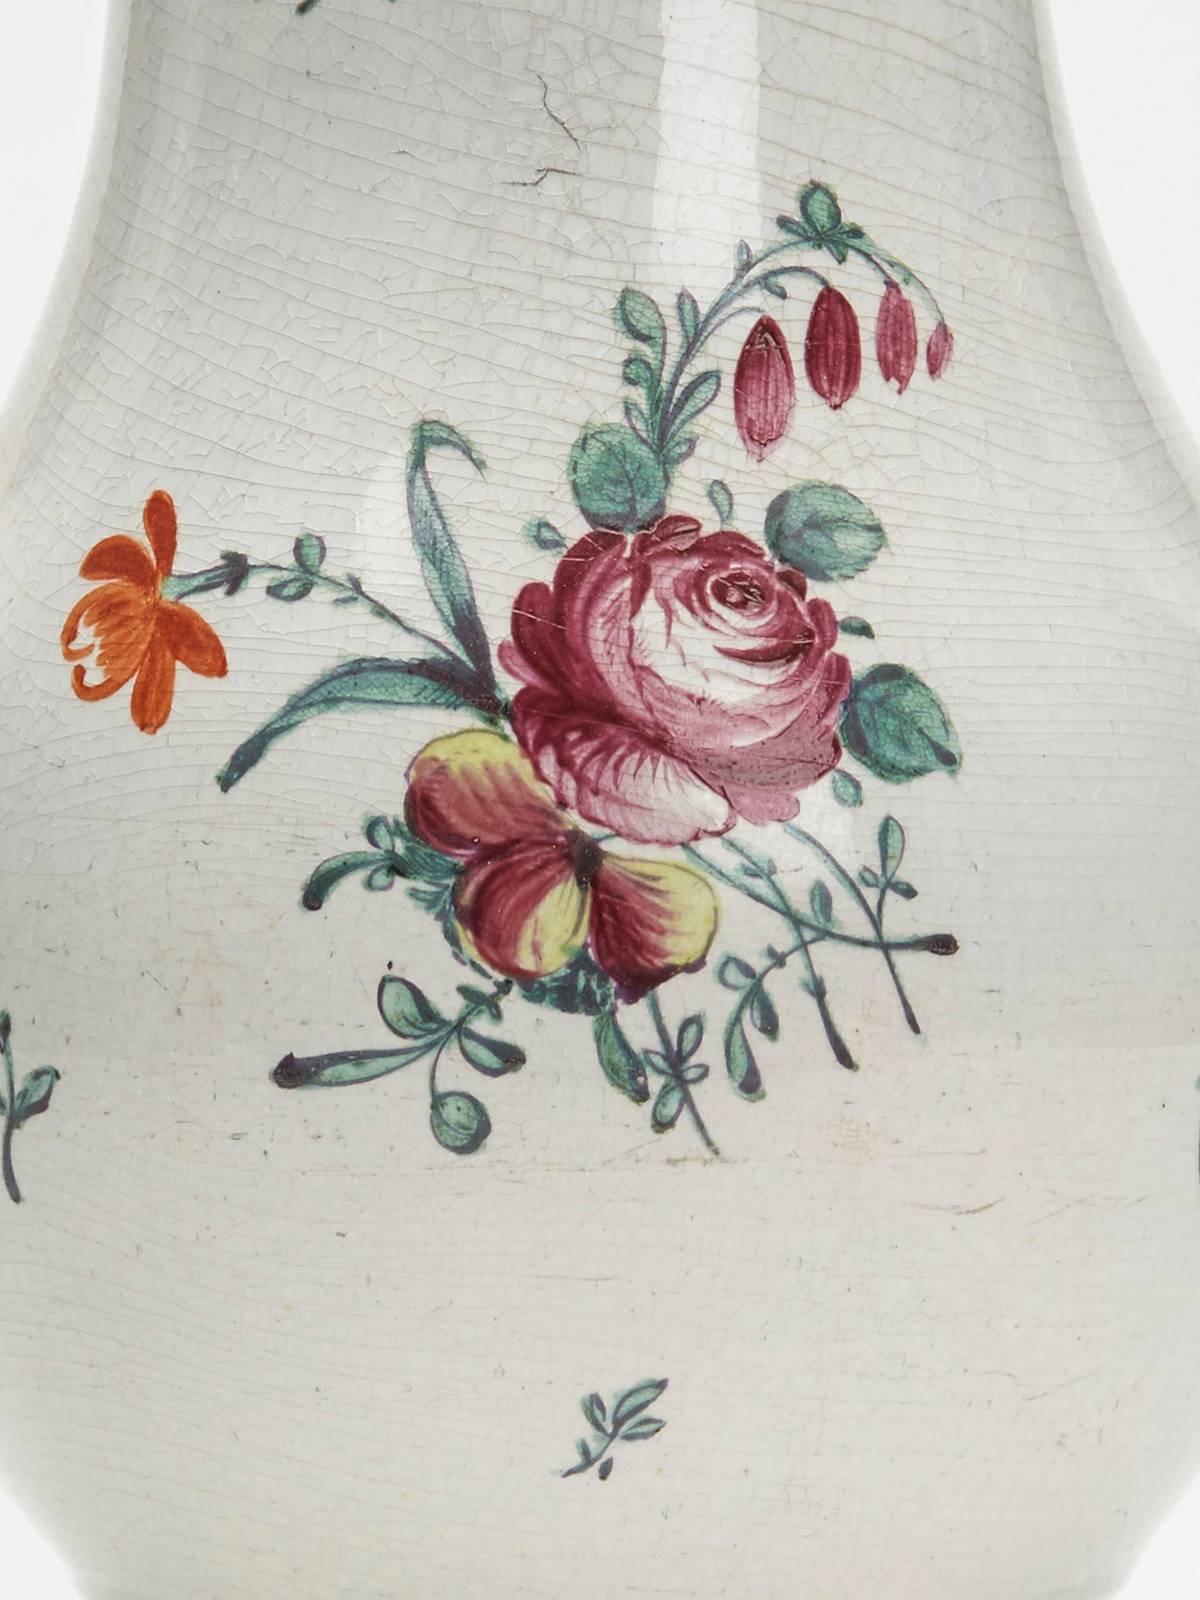 Antique Staffordshire Floral Painted Pearlware Coffee Pot 18th Century In Fair Condition For Sale In Bishop's Stortford, Hertfordshire